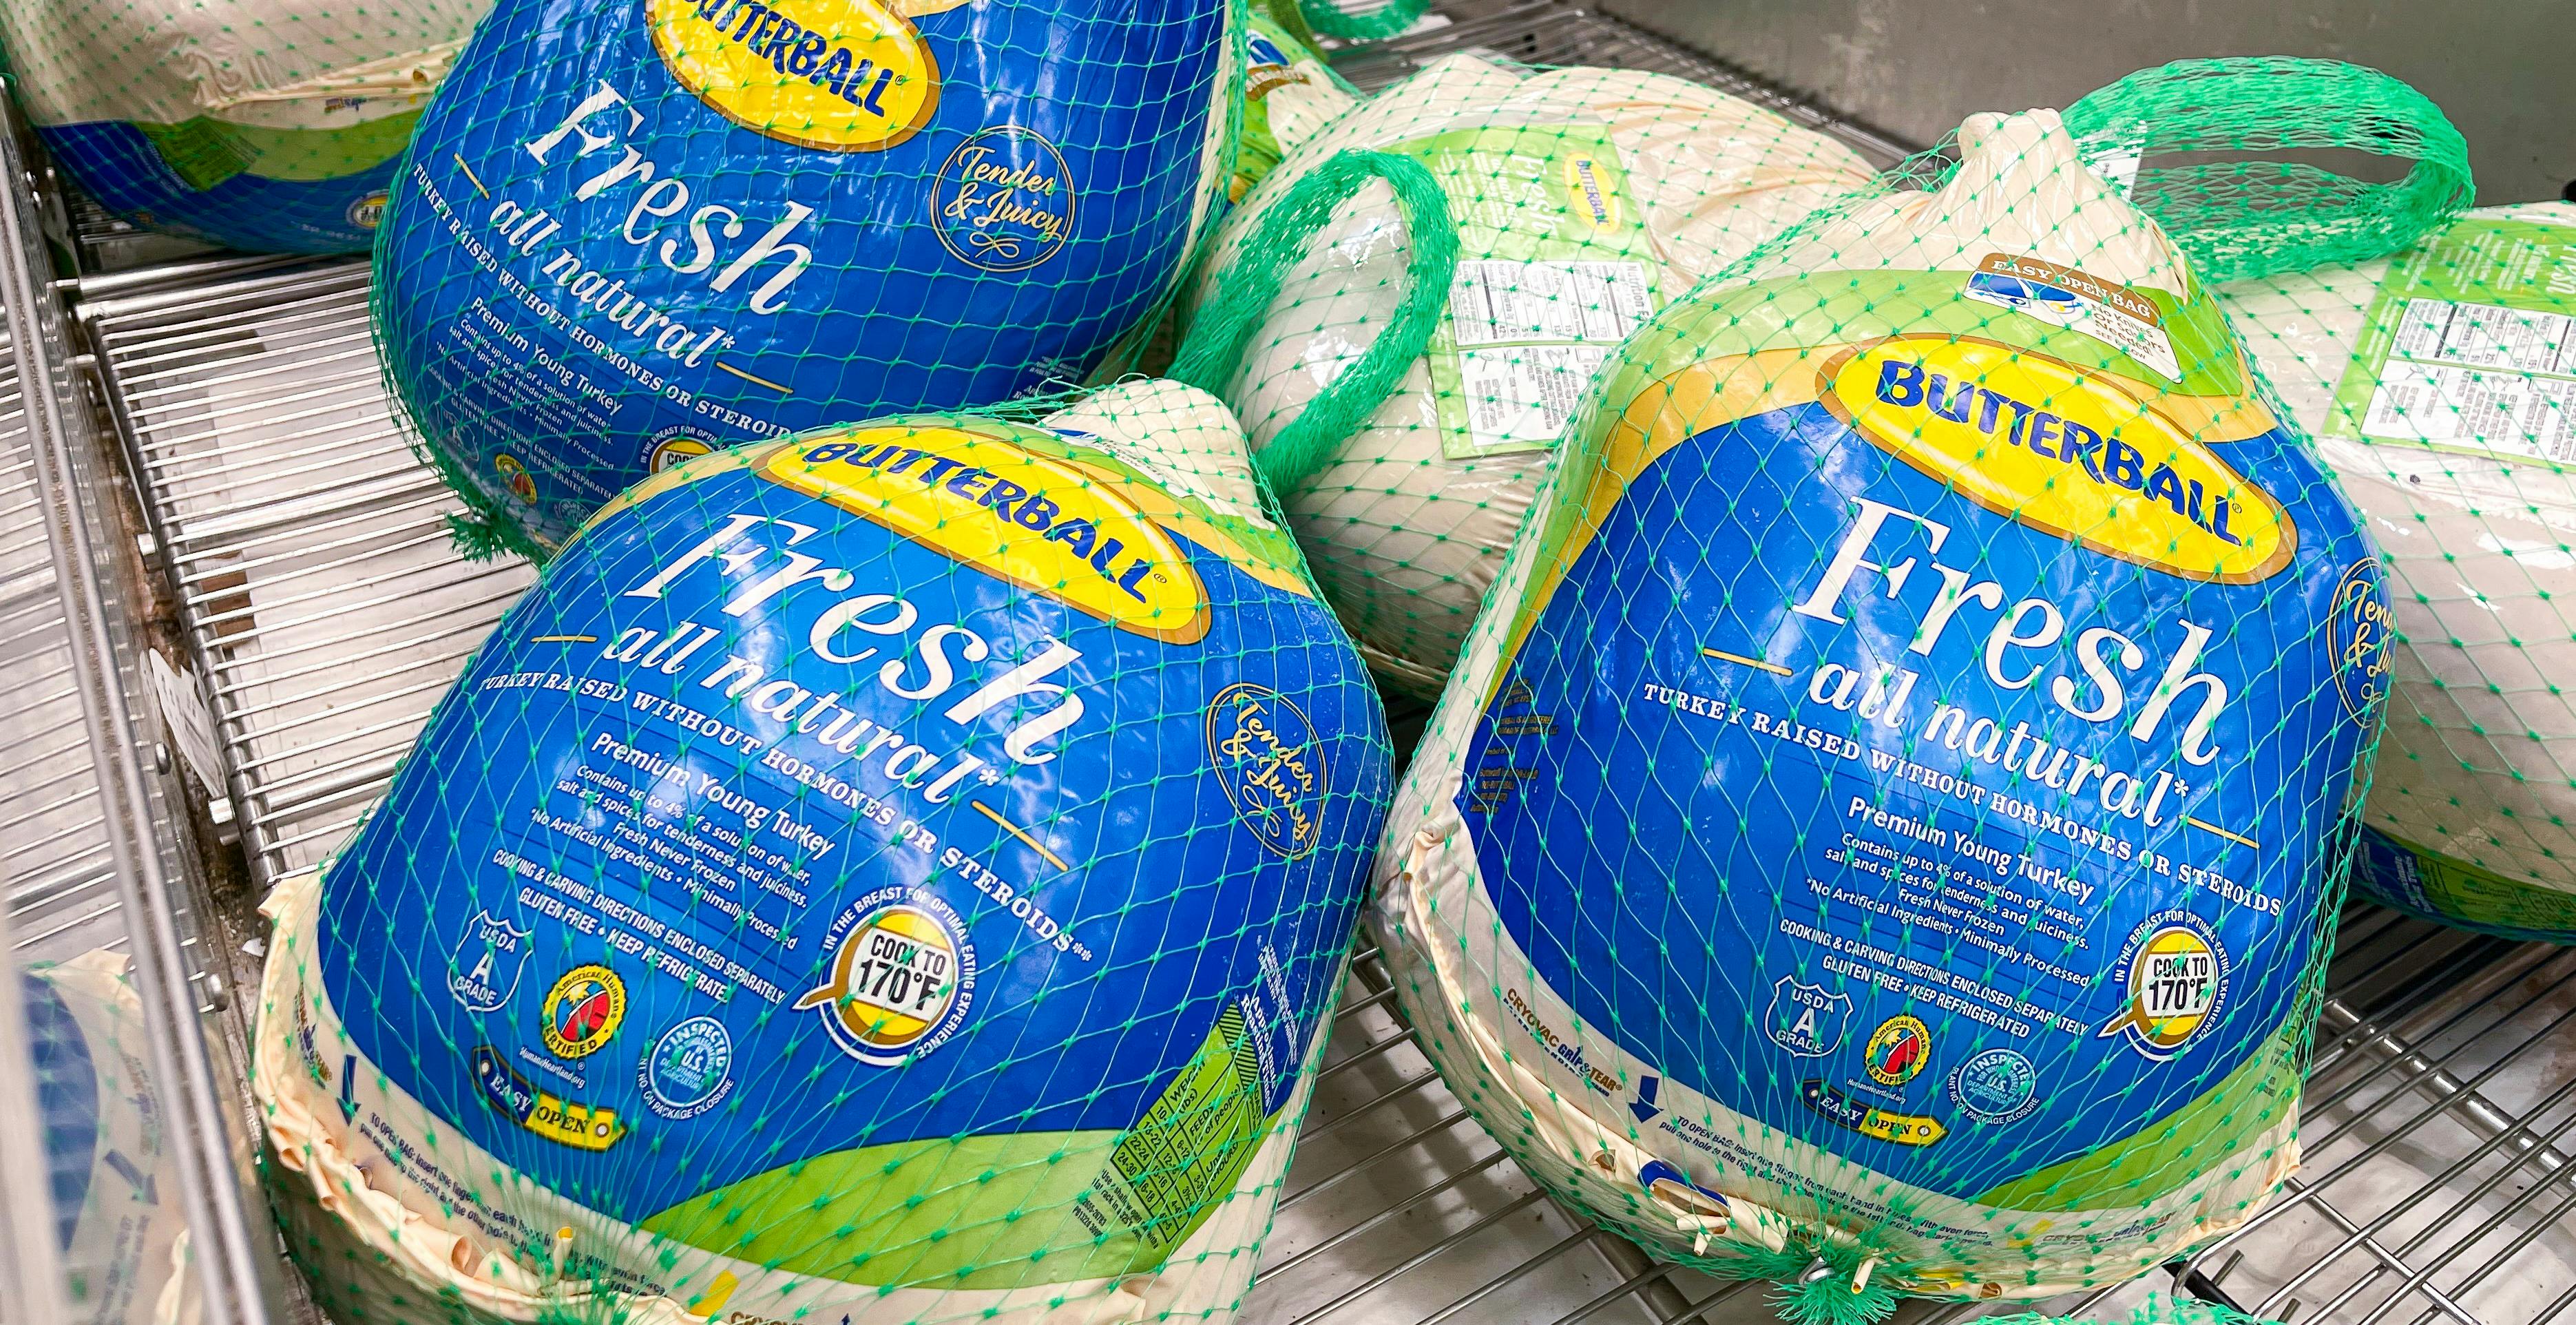 Costco Turkey Price for 2022 0.99 Cents Per Pound! Here's What to Know